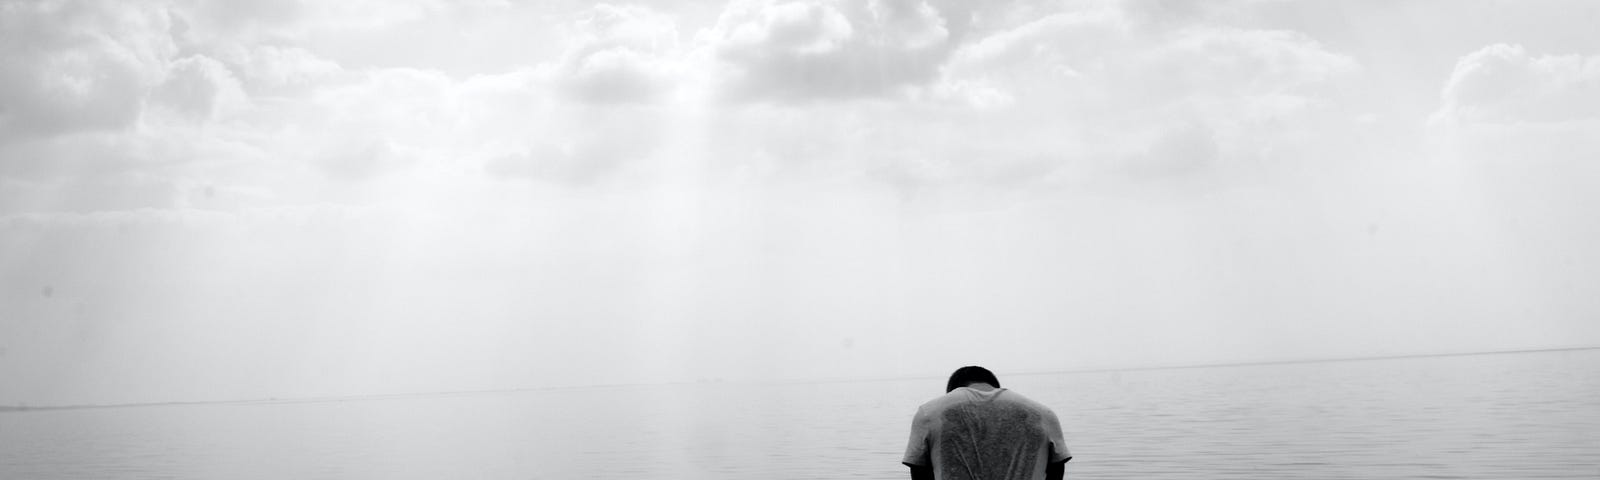 A man stands alone in water, head bowed in sorrow